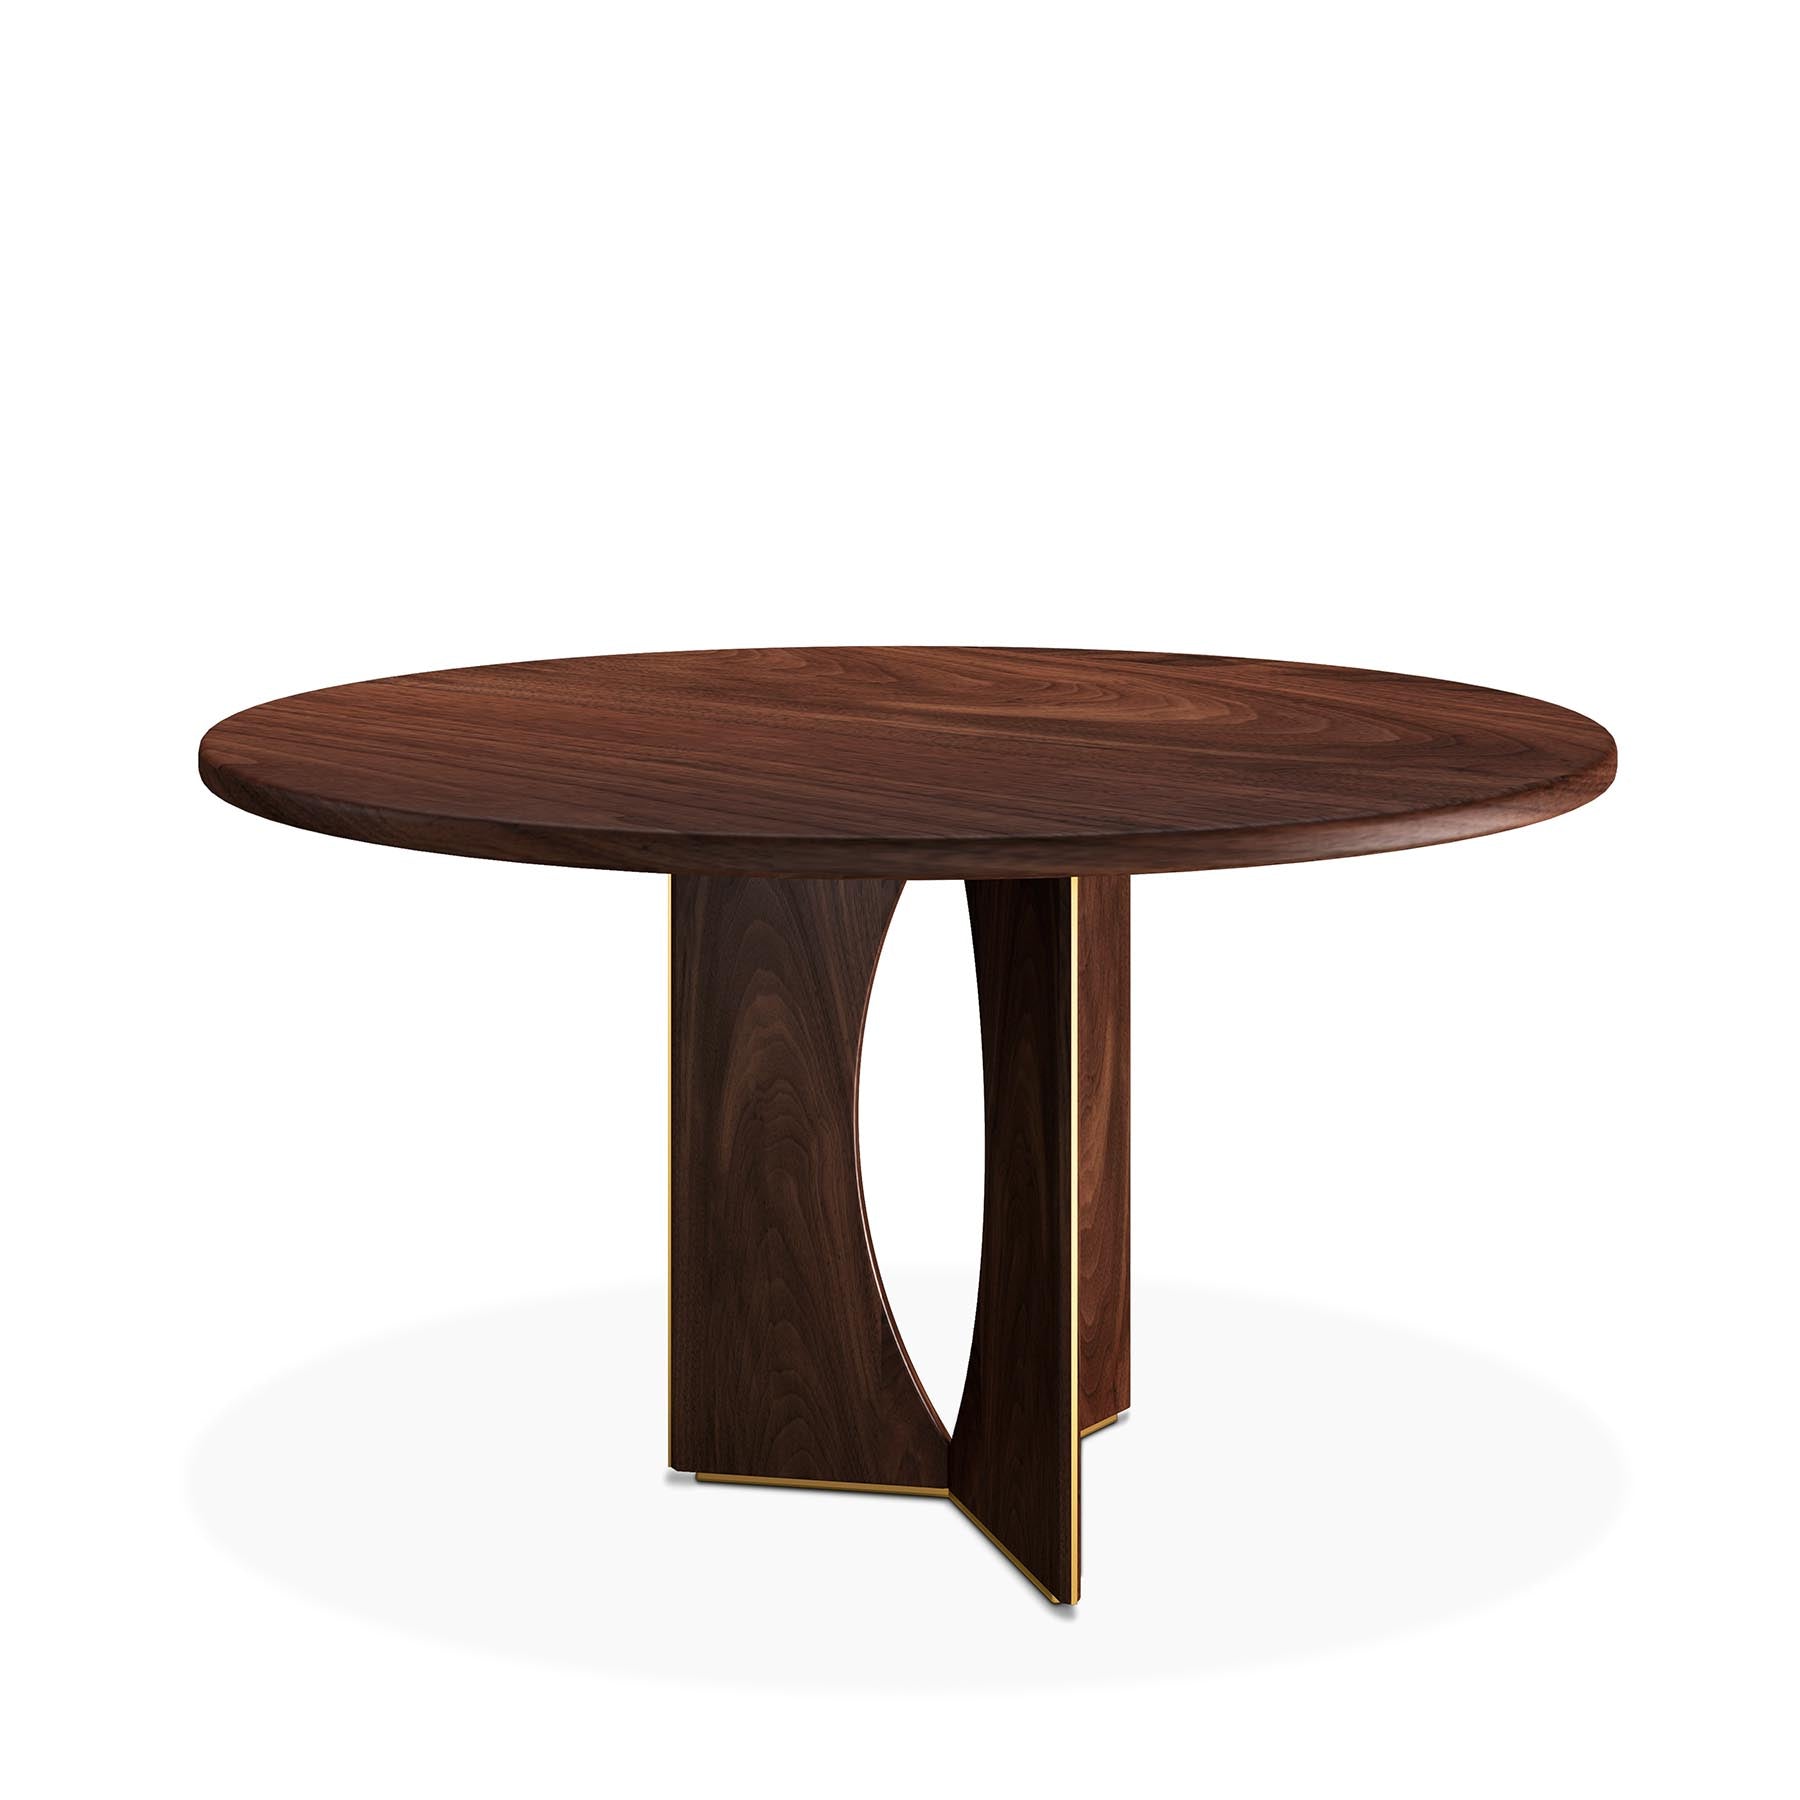 TAYLOR - ROUND DINING TABLE | Modern Furniture + Decor